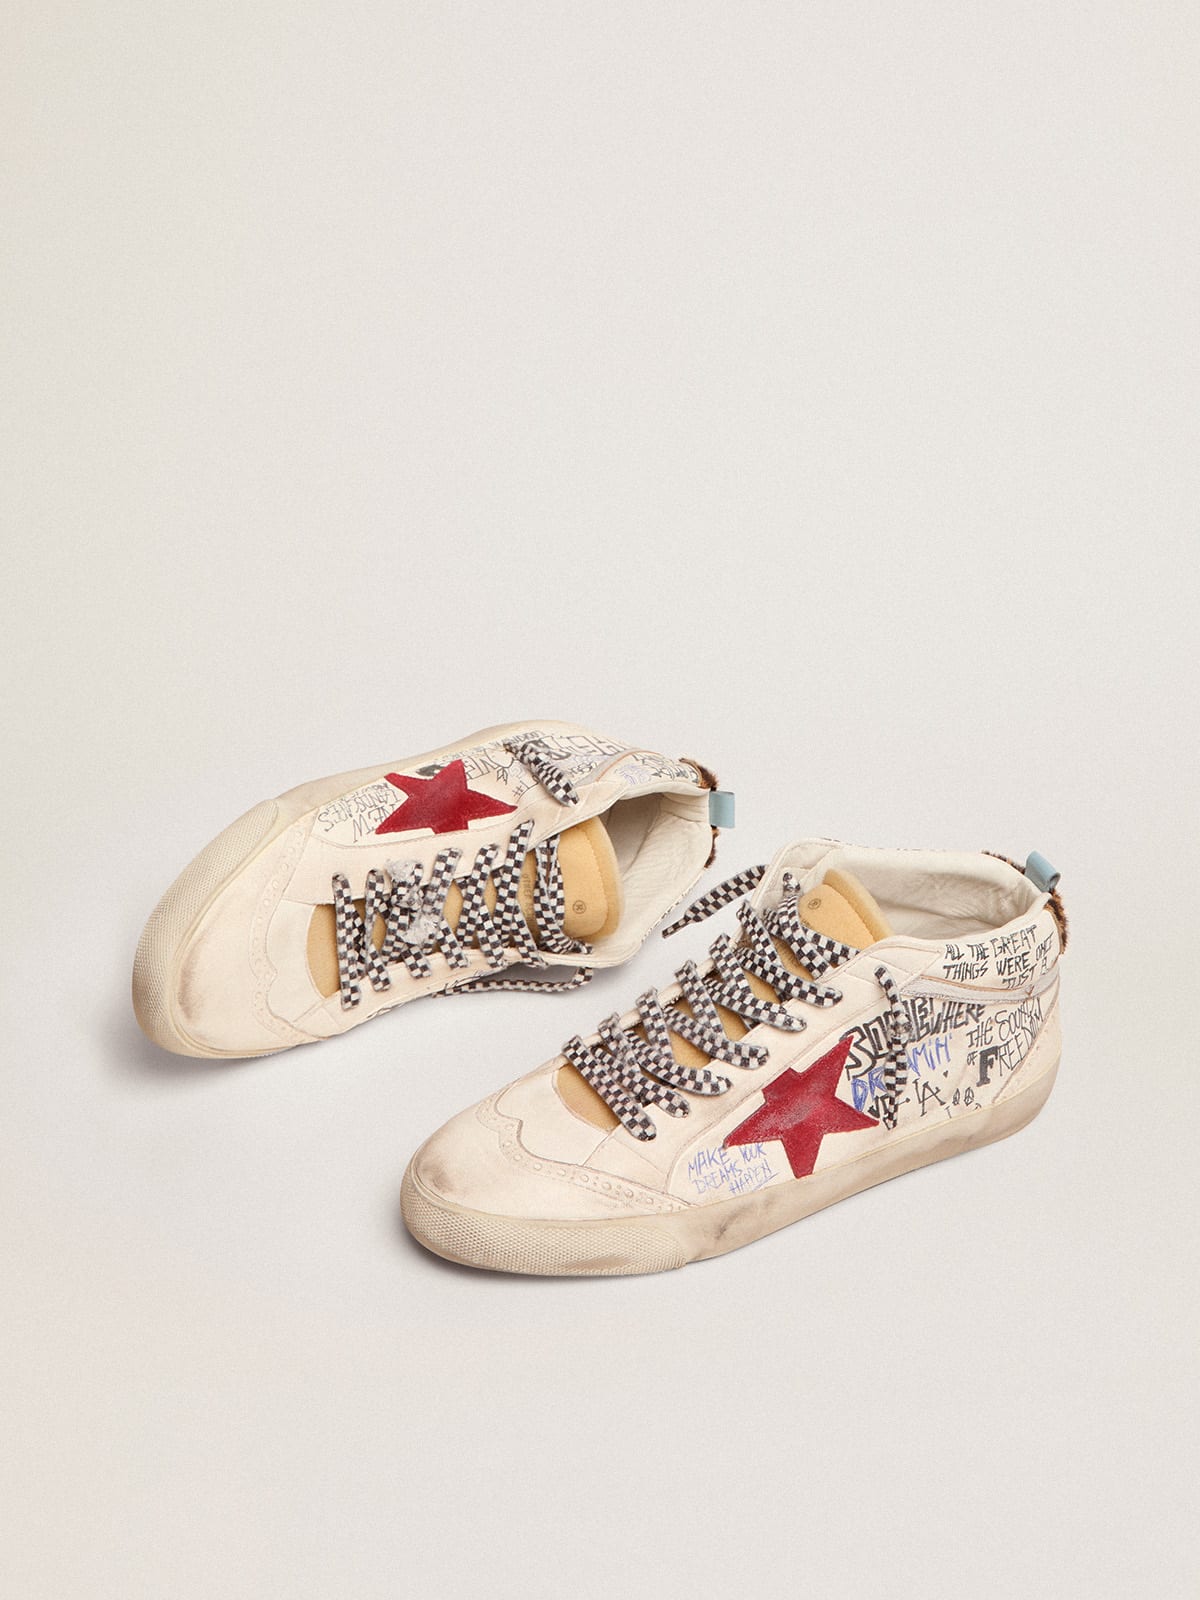 Golden Goose - Mid Star LTD sneakers with contrast lettering and red suede star in 